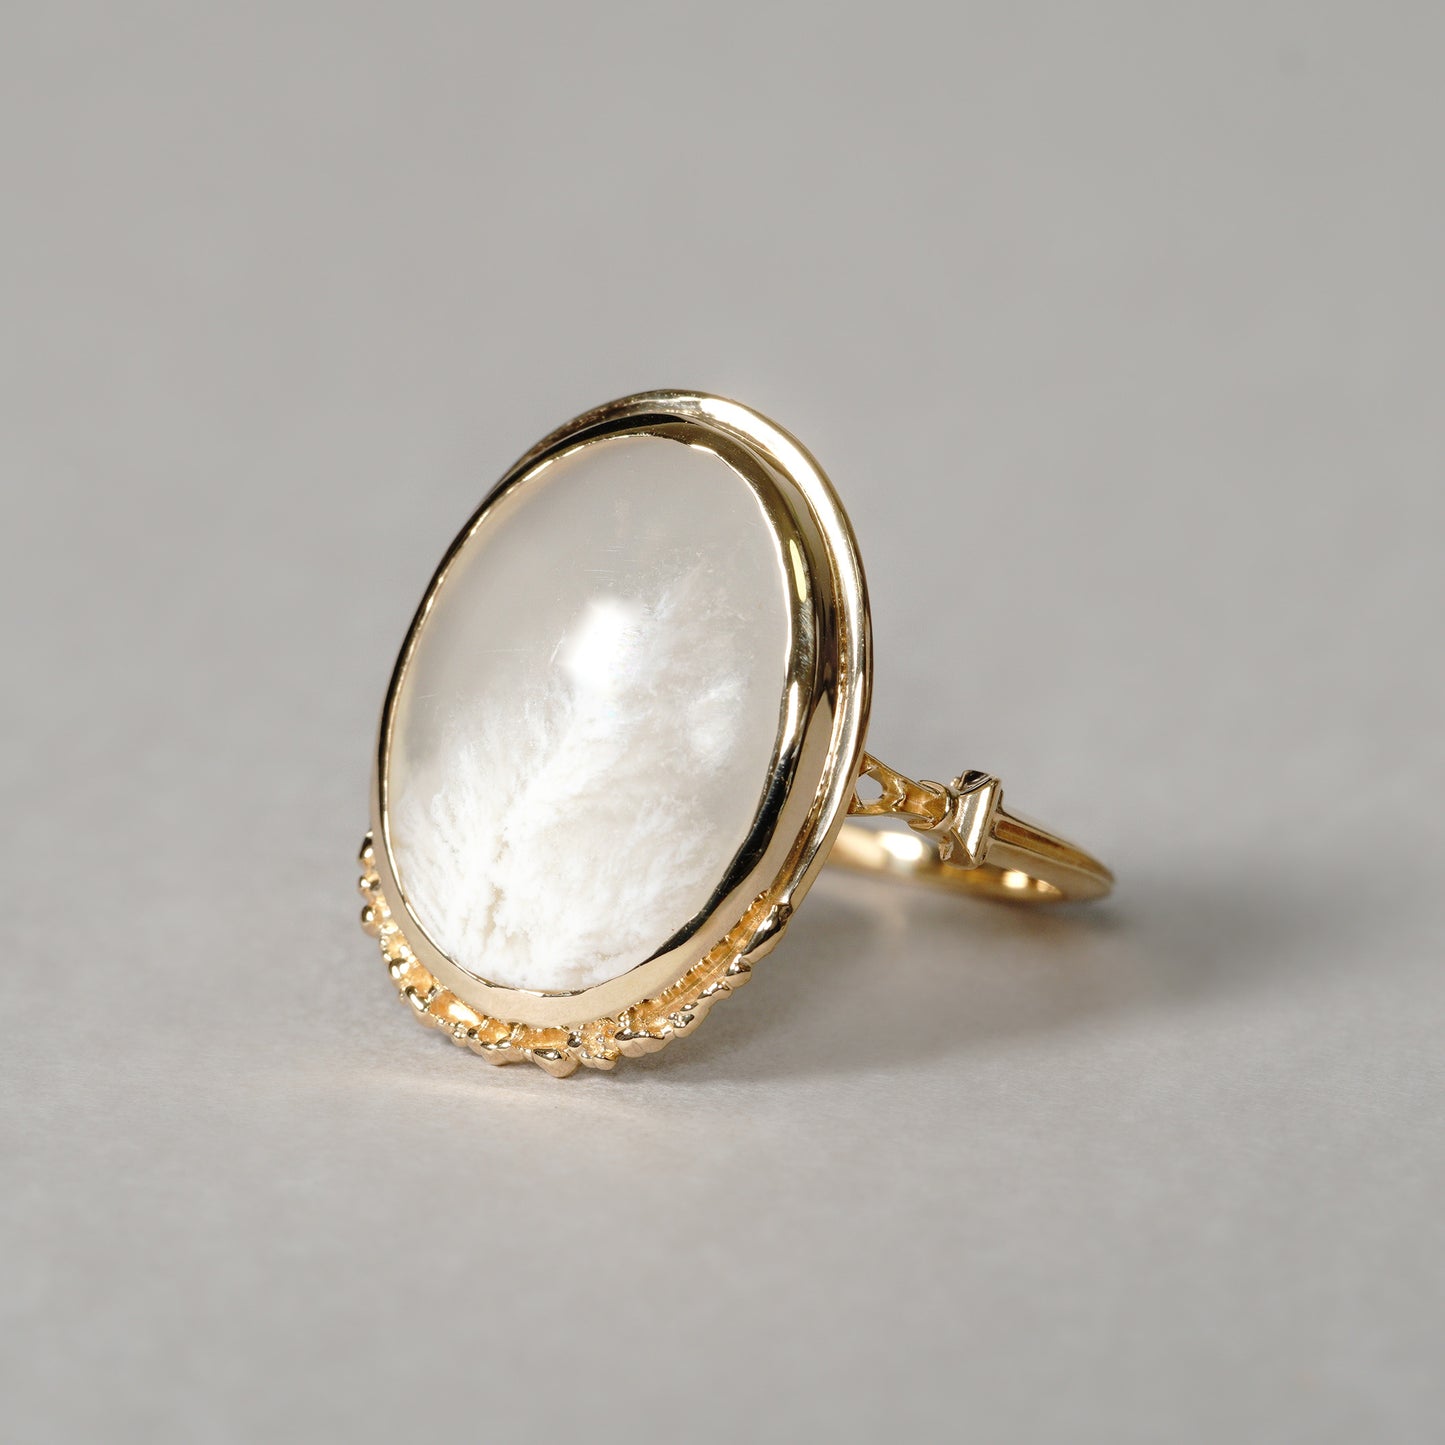 1347 White Plume Agate Ring